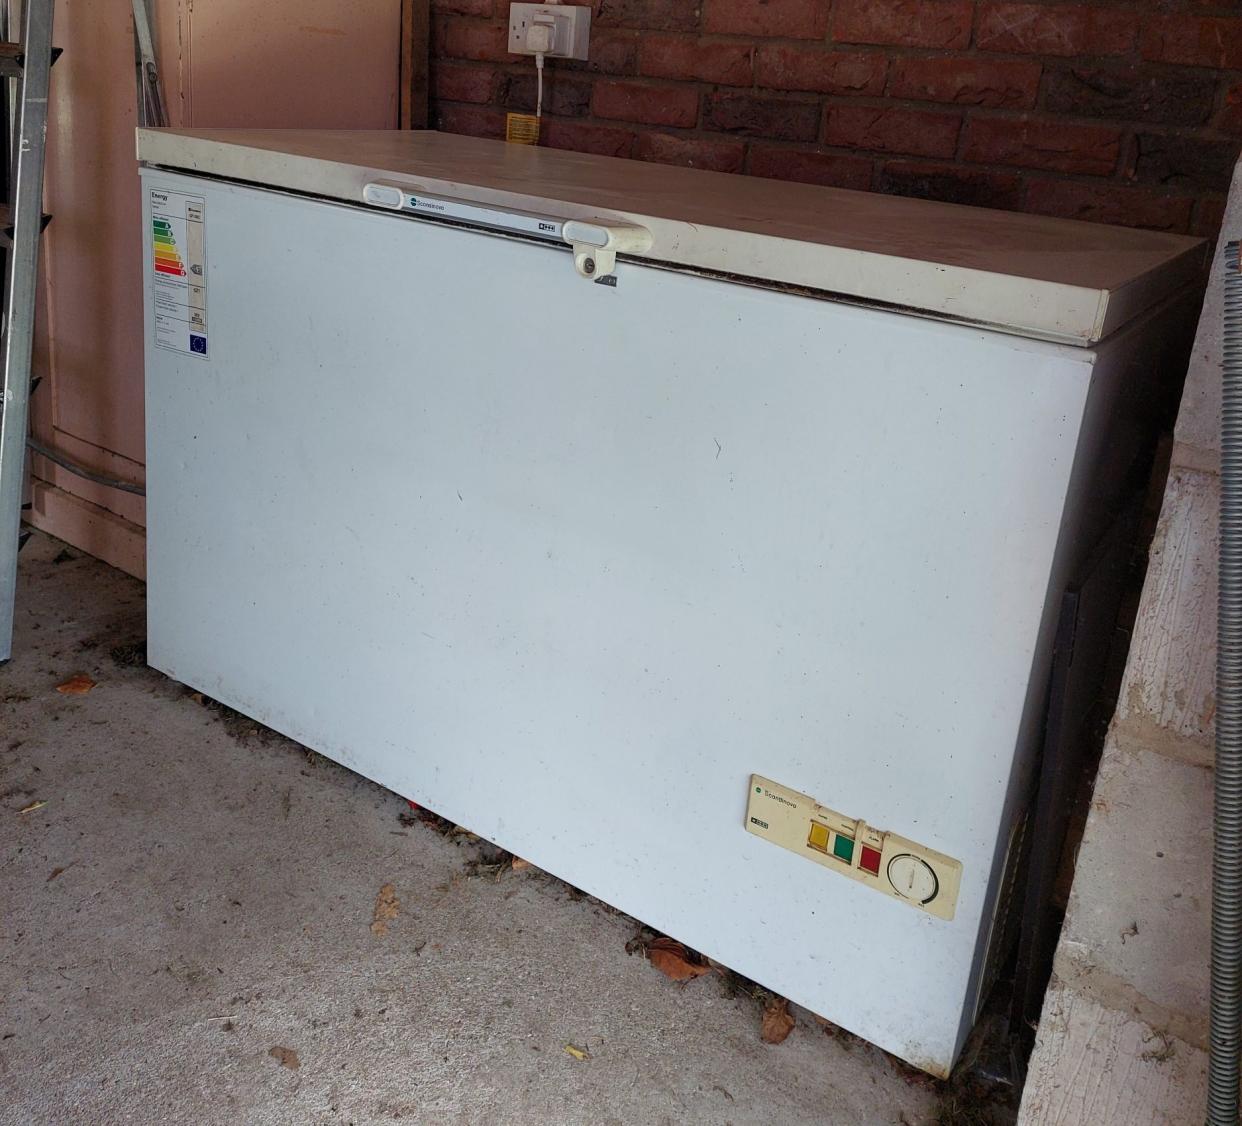 Susan Elsey's Scandinova chest freezer is between 40 and 50 years old and still in constant use